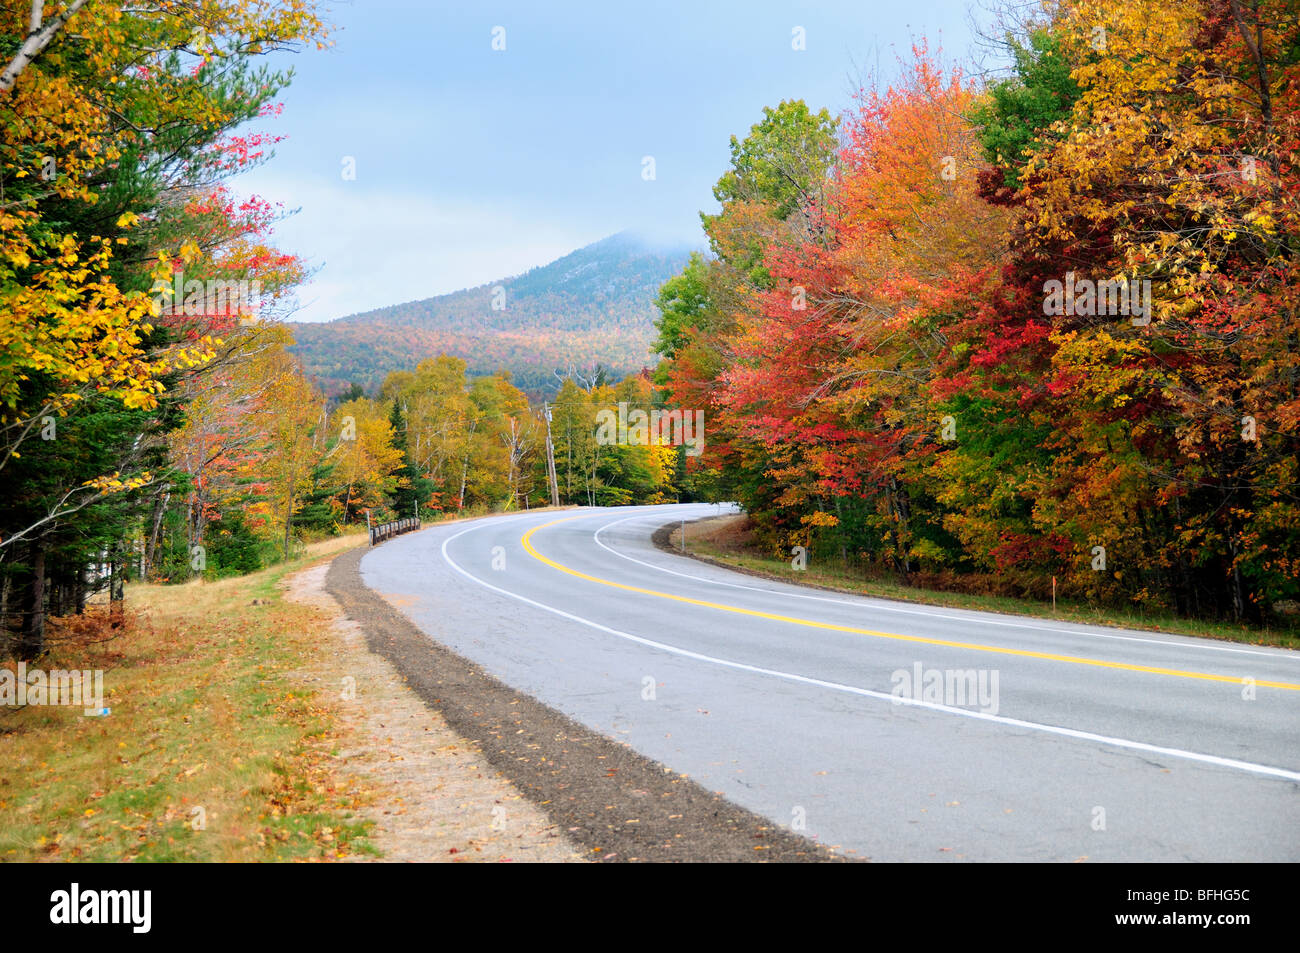 A road winds through the misty, saturated autumn color in the White Mountains, New Hampshire, USA. Stock Photo